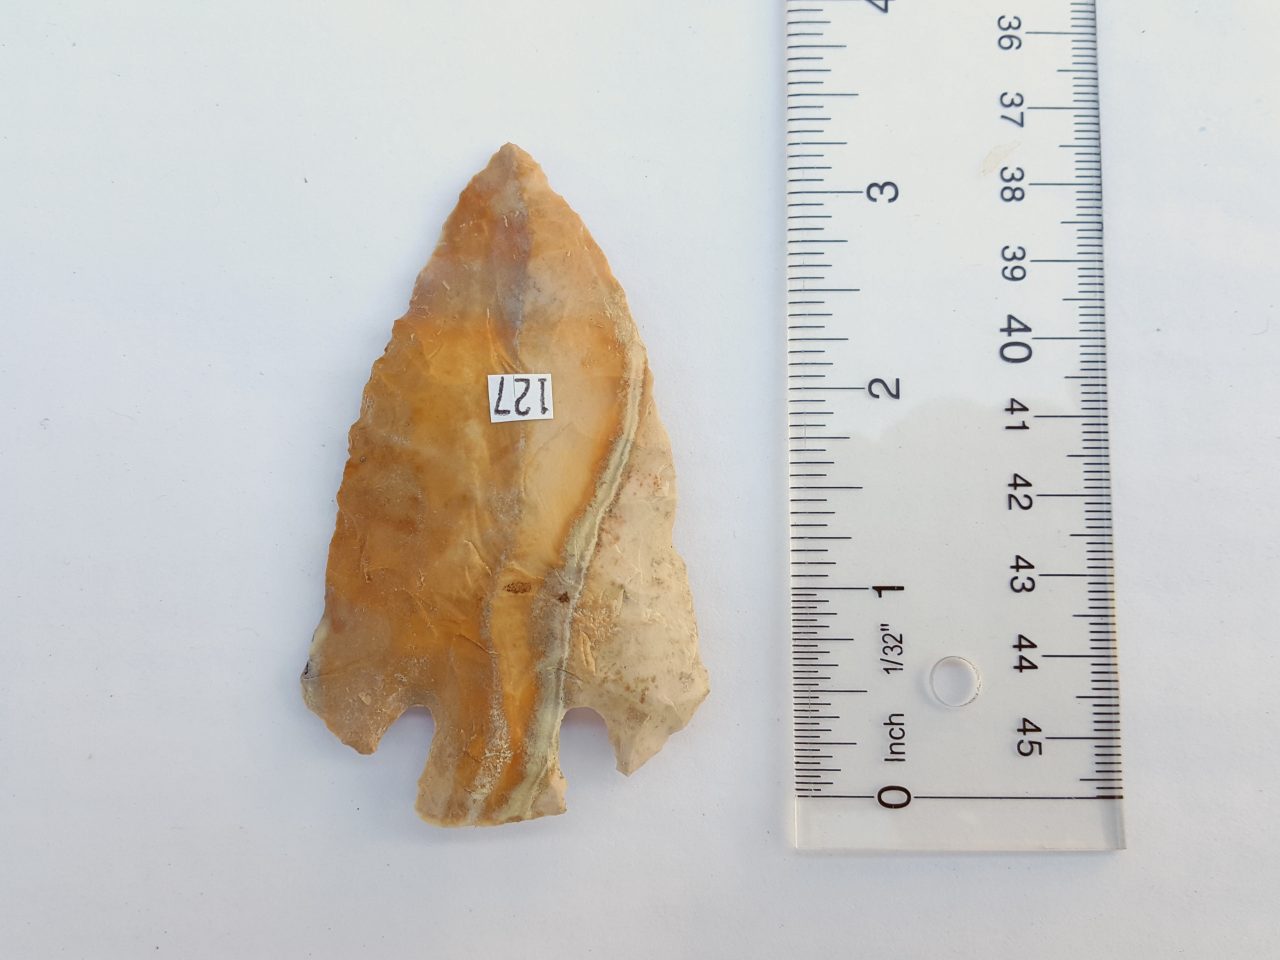 Fl. Clay type arrowhead, COLORFUL CHERT! | Fossils & Artifacts for Sale | Paleo Enterprises | Fossils & Artifacts for Sale